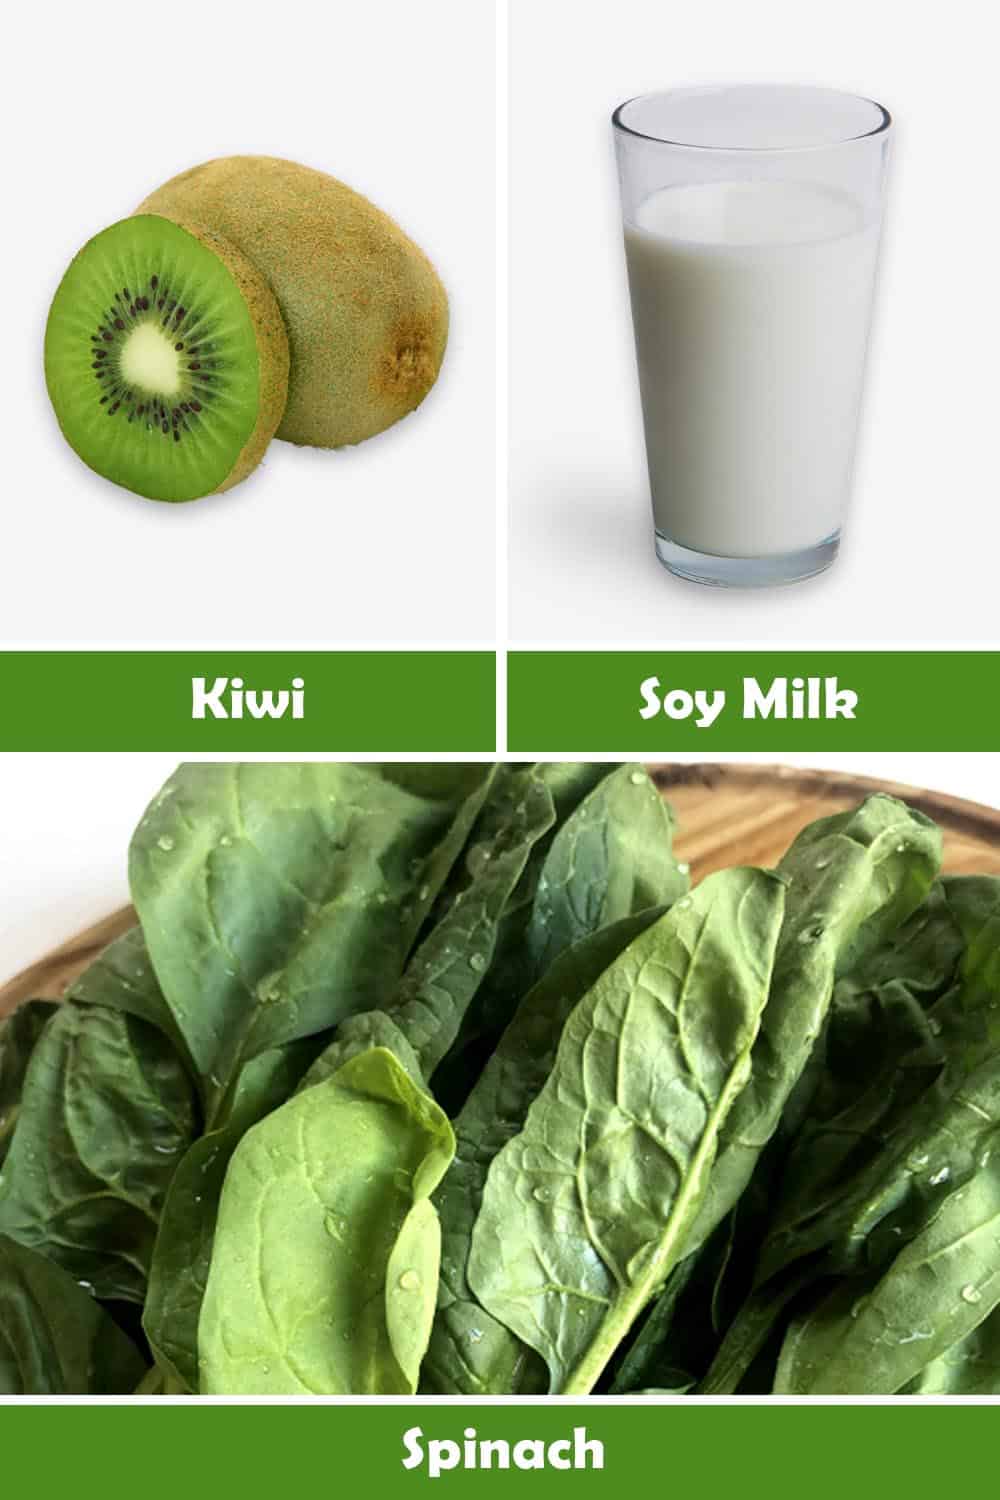 KIWI, SOY MILK AND SPINACH